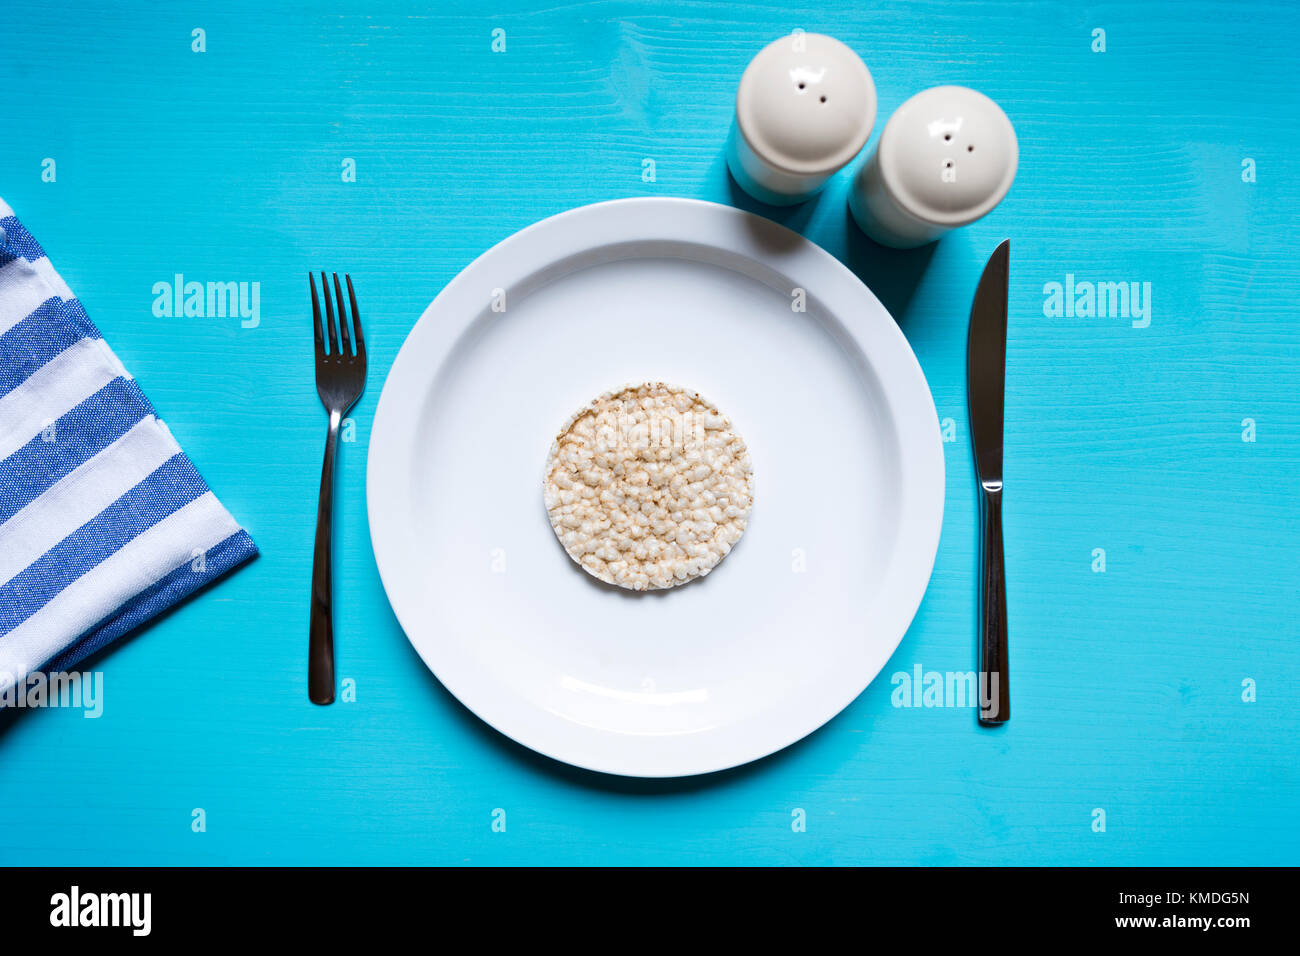 Diet concept. Rice pop cake on a white plate sitting on a blue turquoise wooden table. Table set for light breakfast Stock Photo